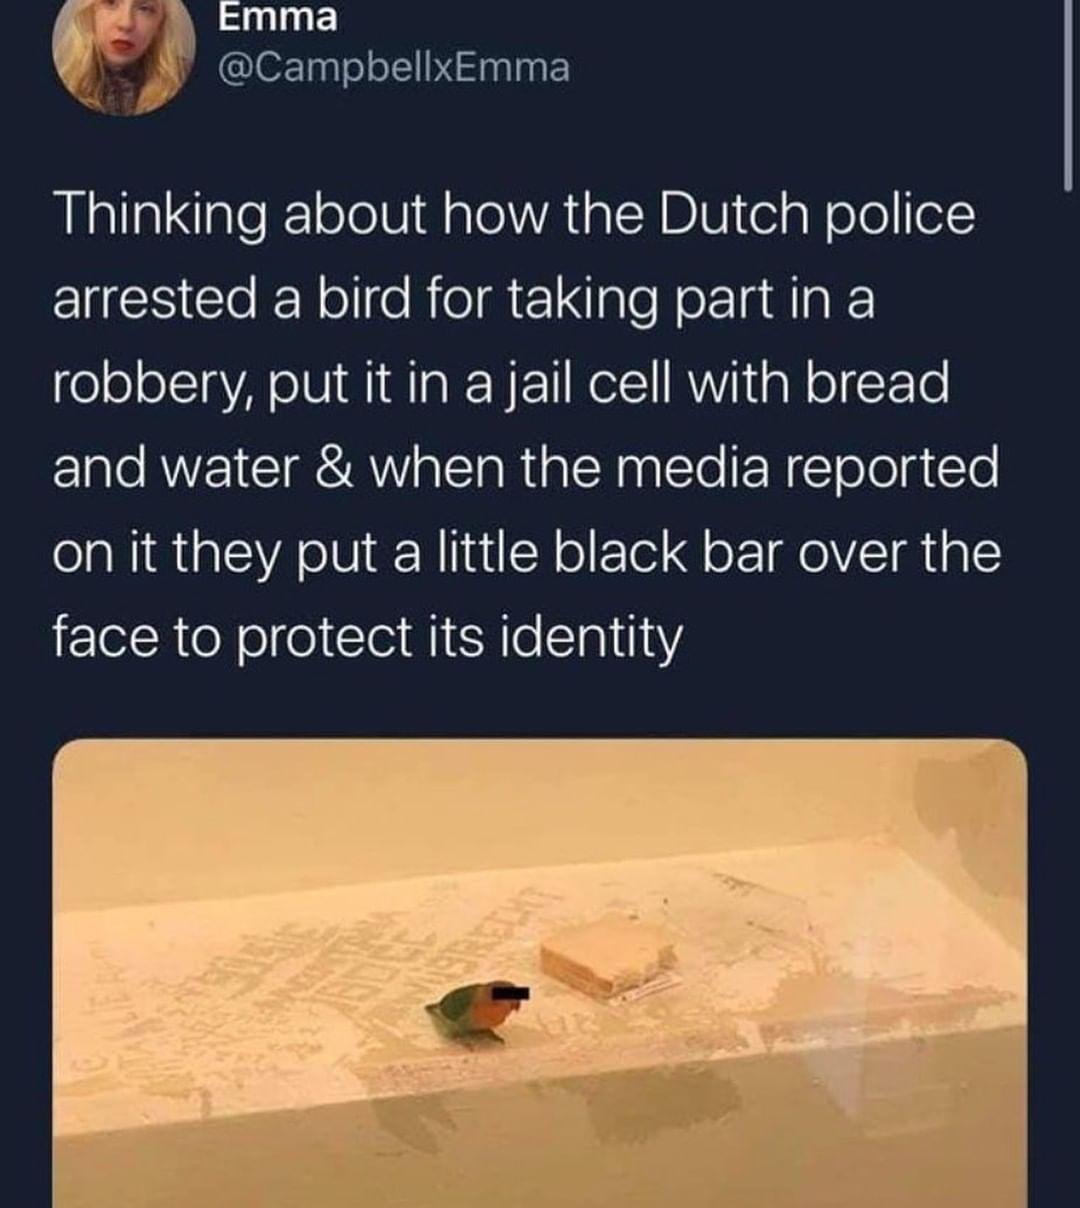 the bird had a right to privacy